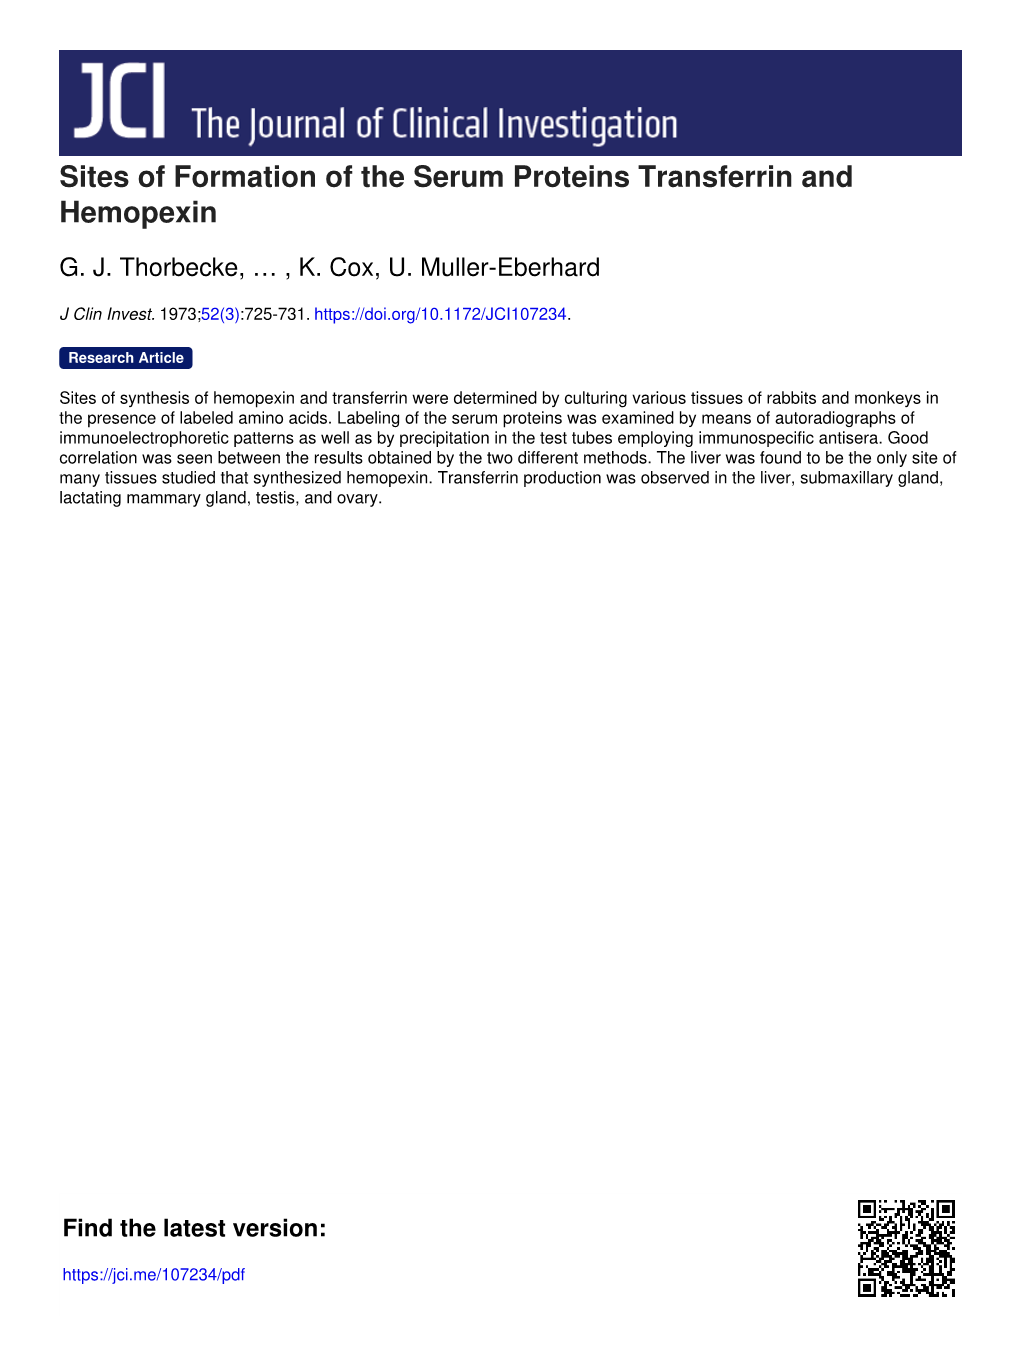 Sites of Formation of the Serum Proteins Transferrin and Hemopexin